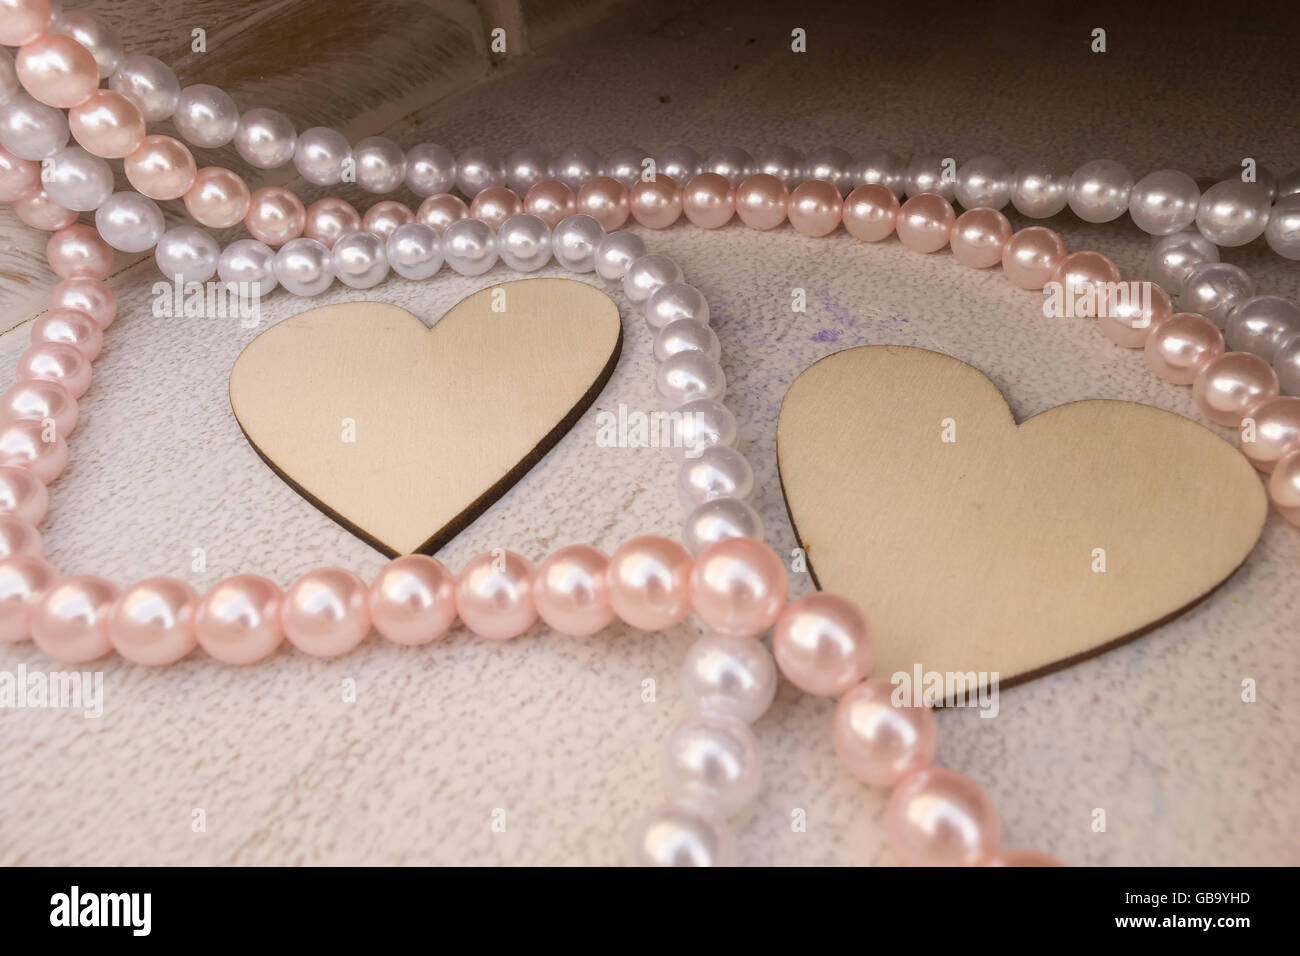 Beautiful wooden heart shapes with necklaces as decorations. Stock Photo